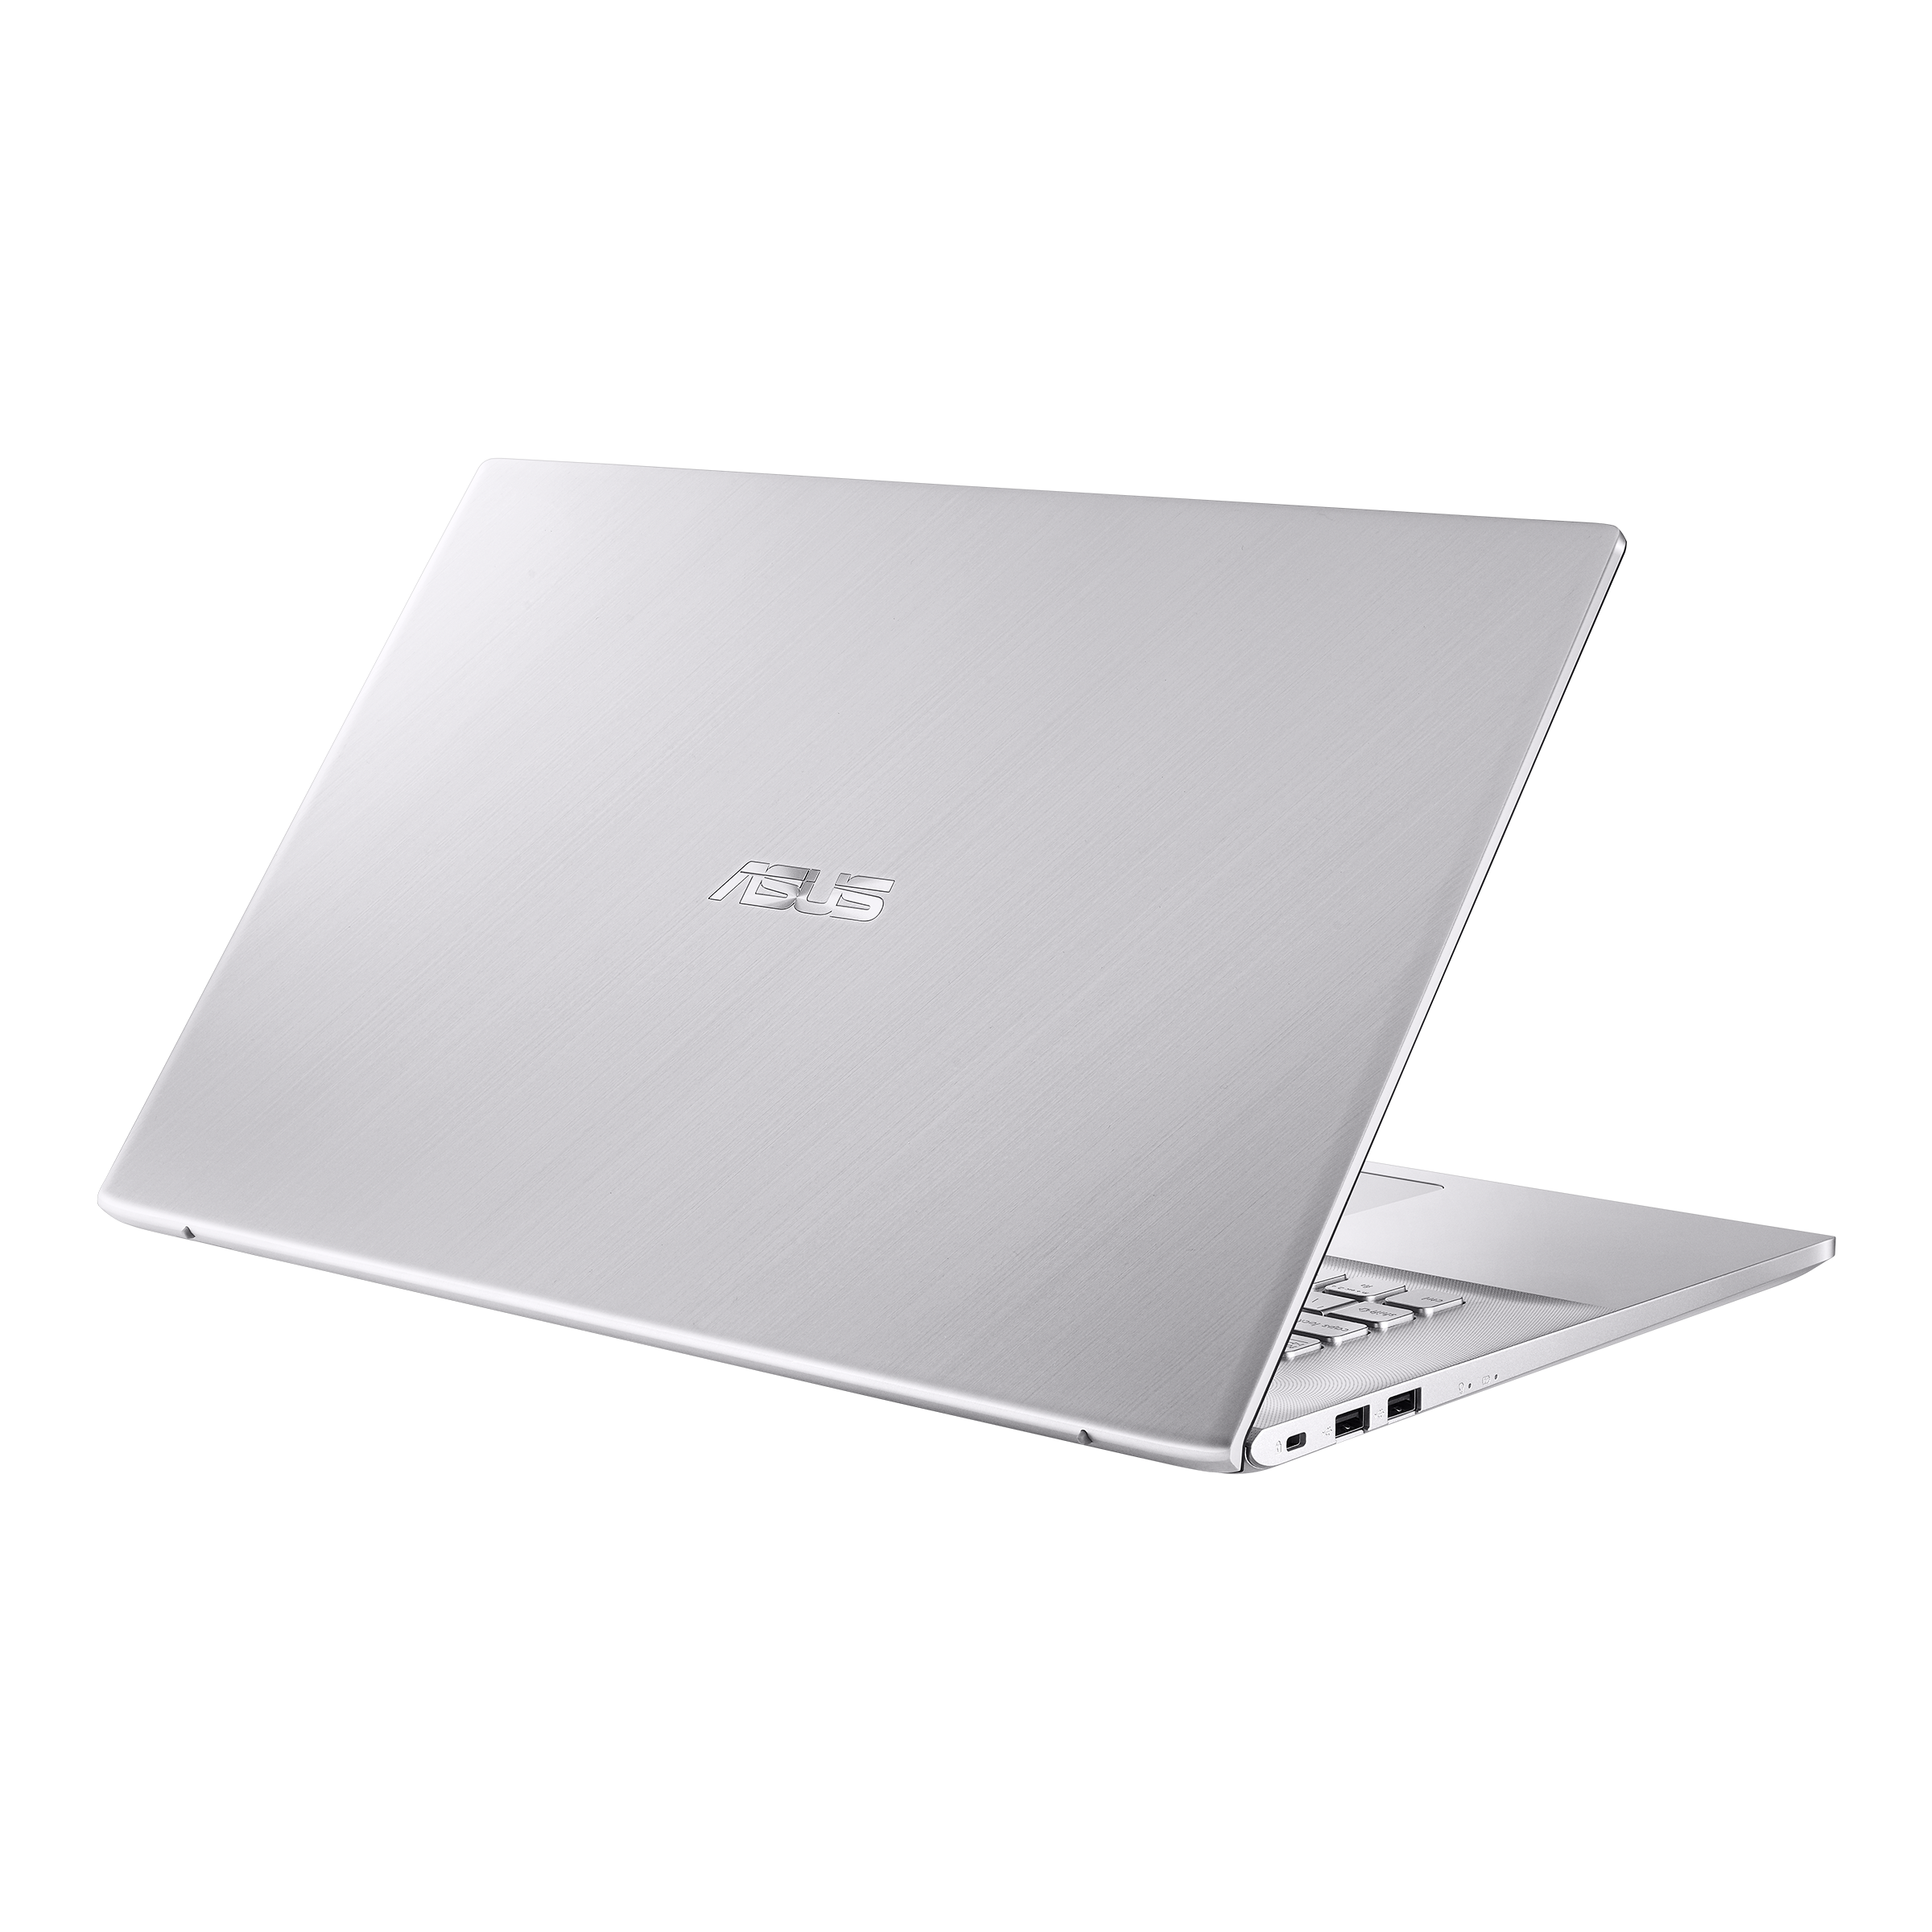 ASUS Vivobook 17 M712｜Laptops For Home｜ASUS USA